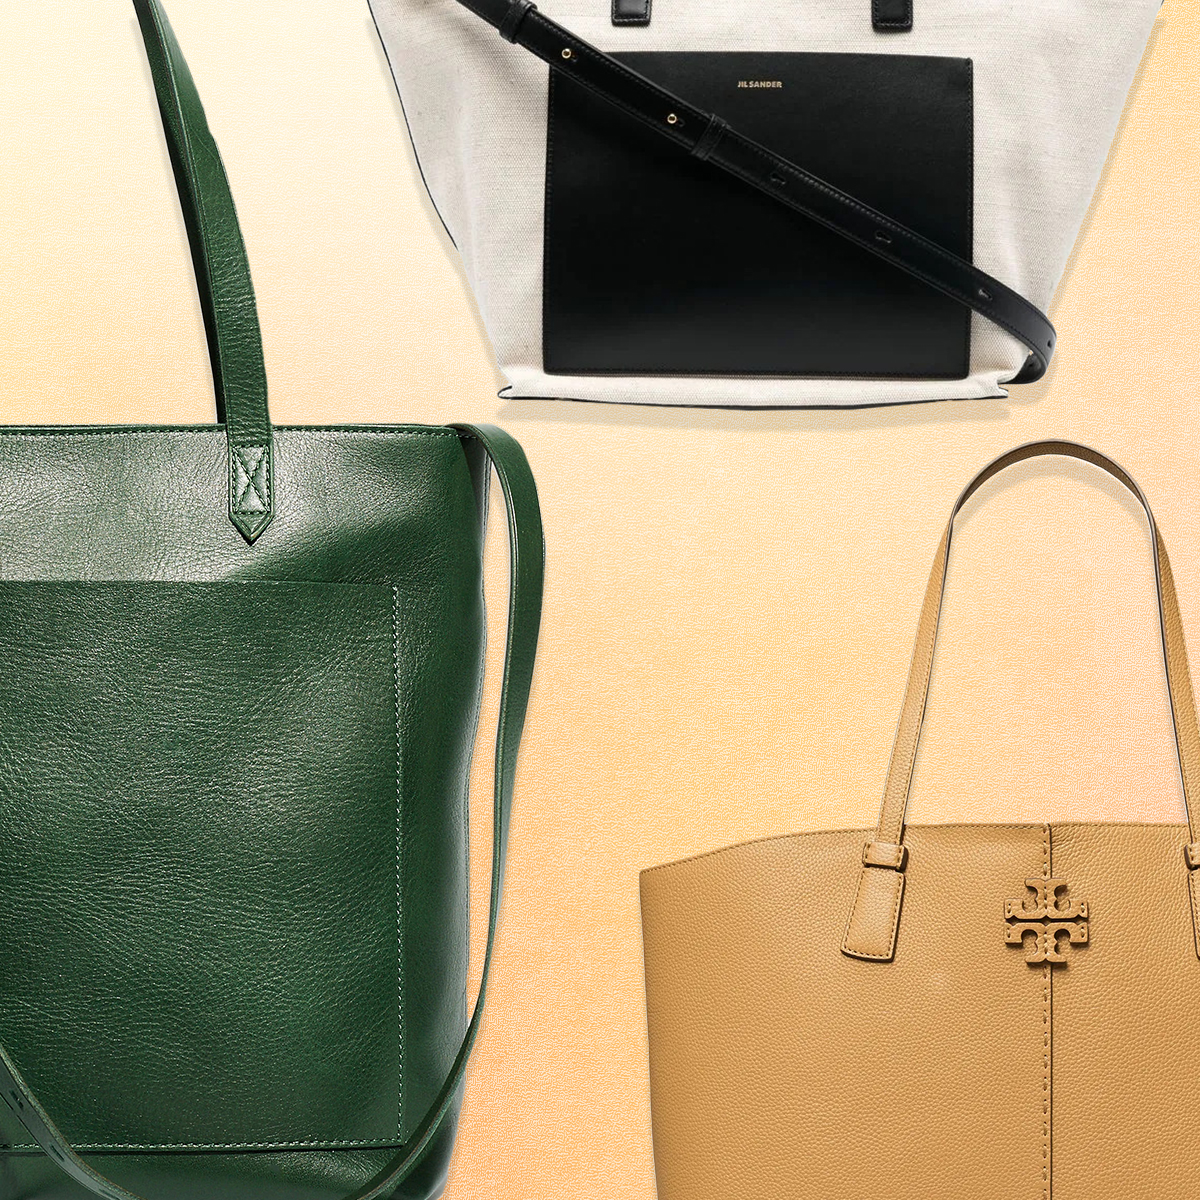 This is the most popular tote bag of 2023, according to Google